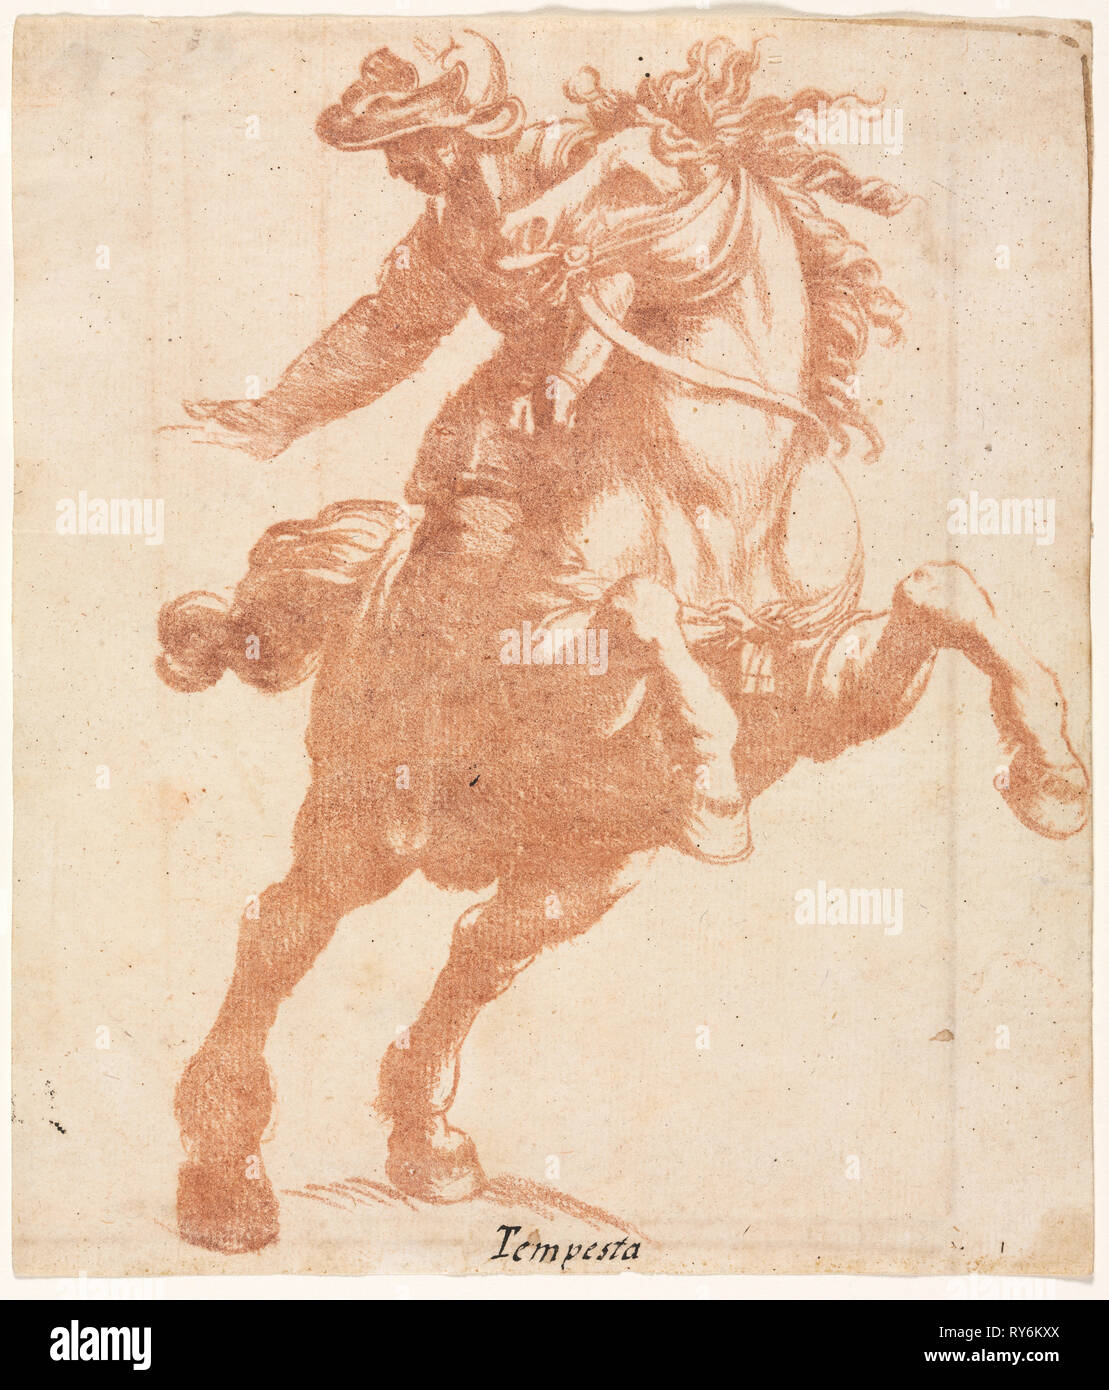 Rearing Horse and Rider, c. 1600. Attributed to Antonio Tempesta (Italian, 1555-1630). Red chalk counterproof; sheet: 19.5 x 16.7 cm (7 11/16 x 6 9/16 in Stock Photo